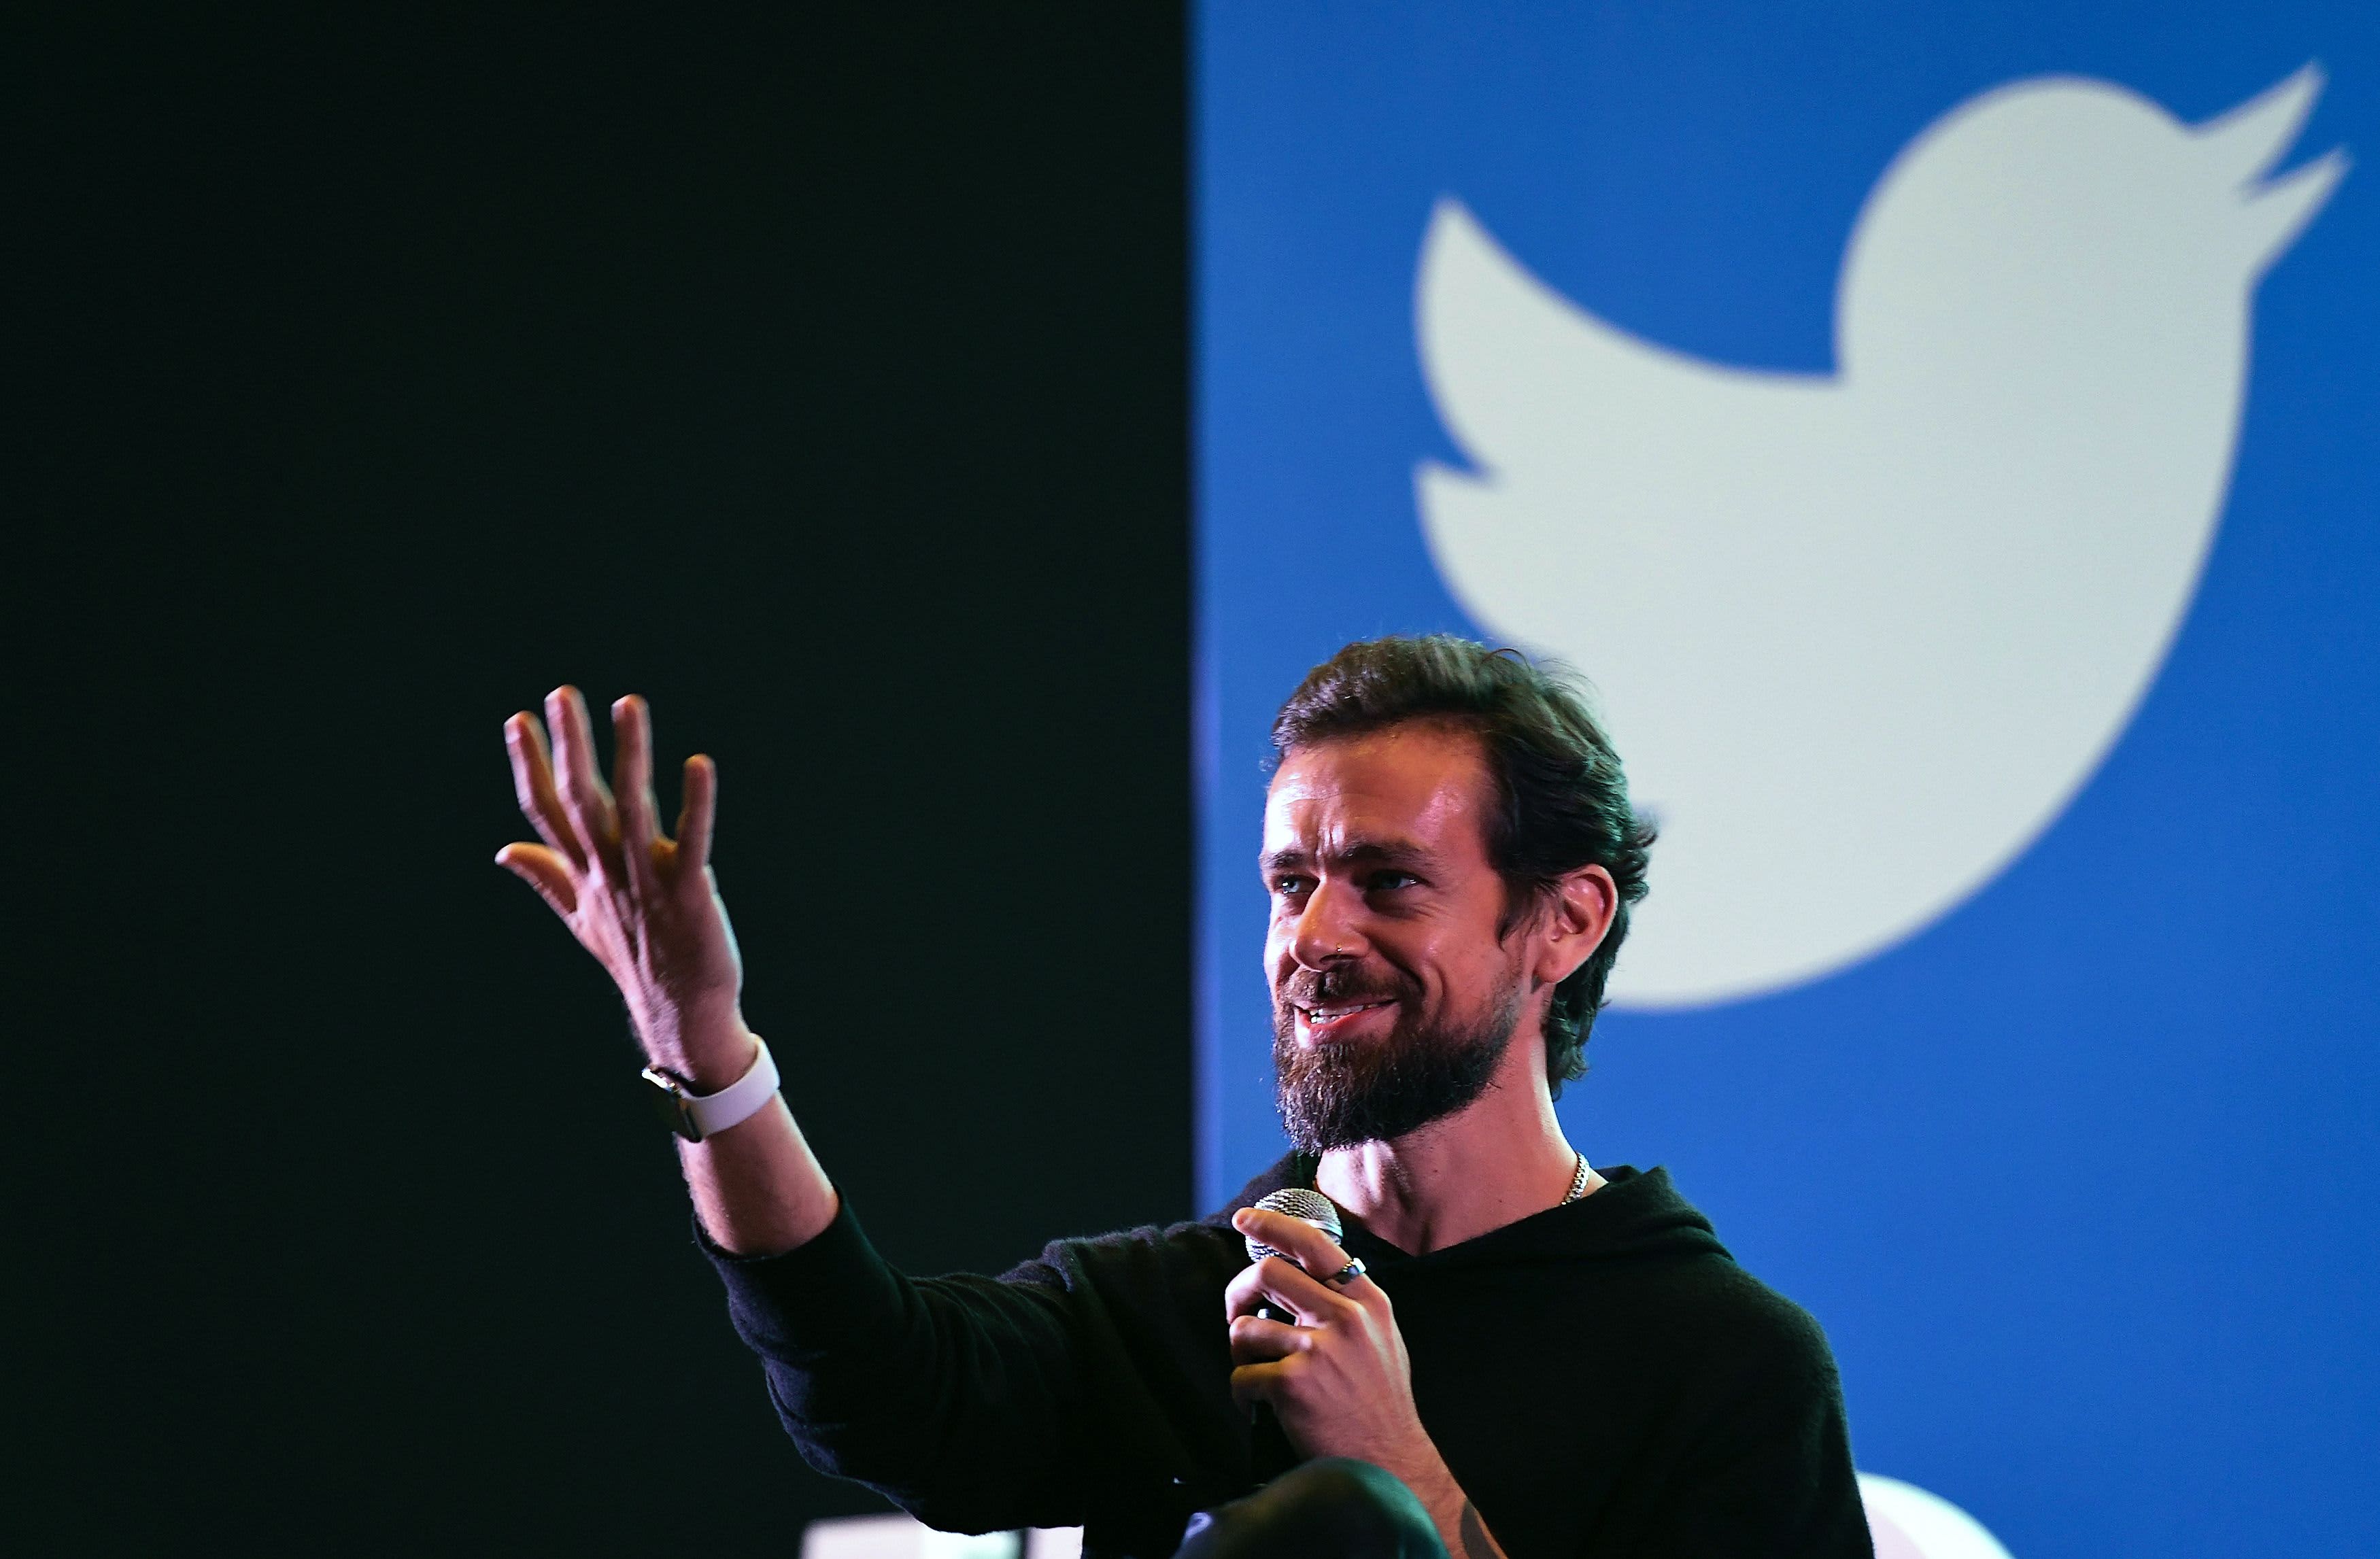 Jack Dorsey is offering to sell the first tweet as an NFT